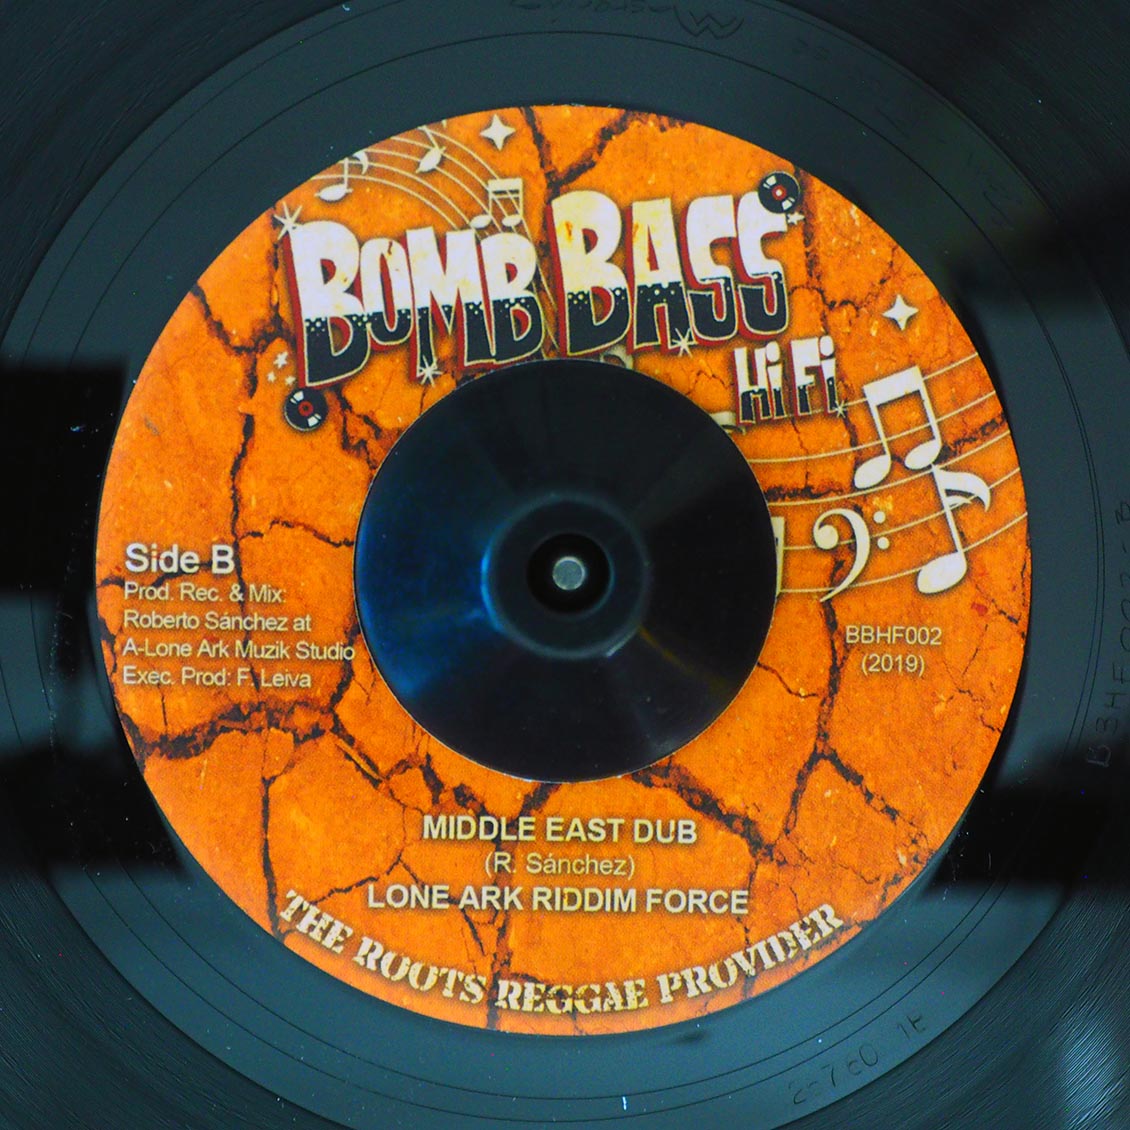 Ras Teo - Down In The Middle East / Lone Ark Riddim Force - Middle East Dub / 7" Bomb Bass Hi Fi